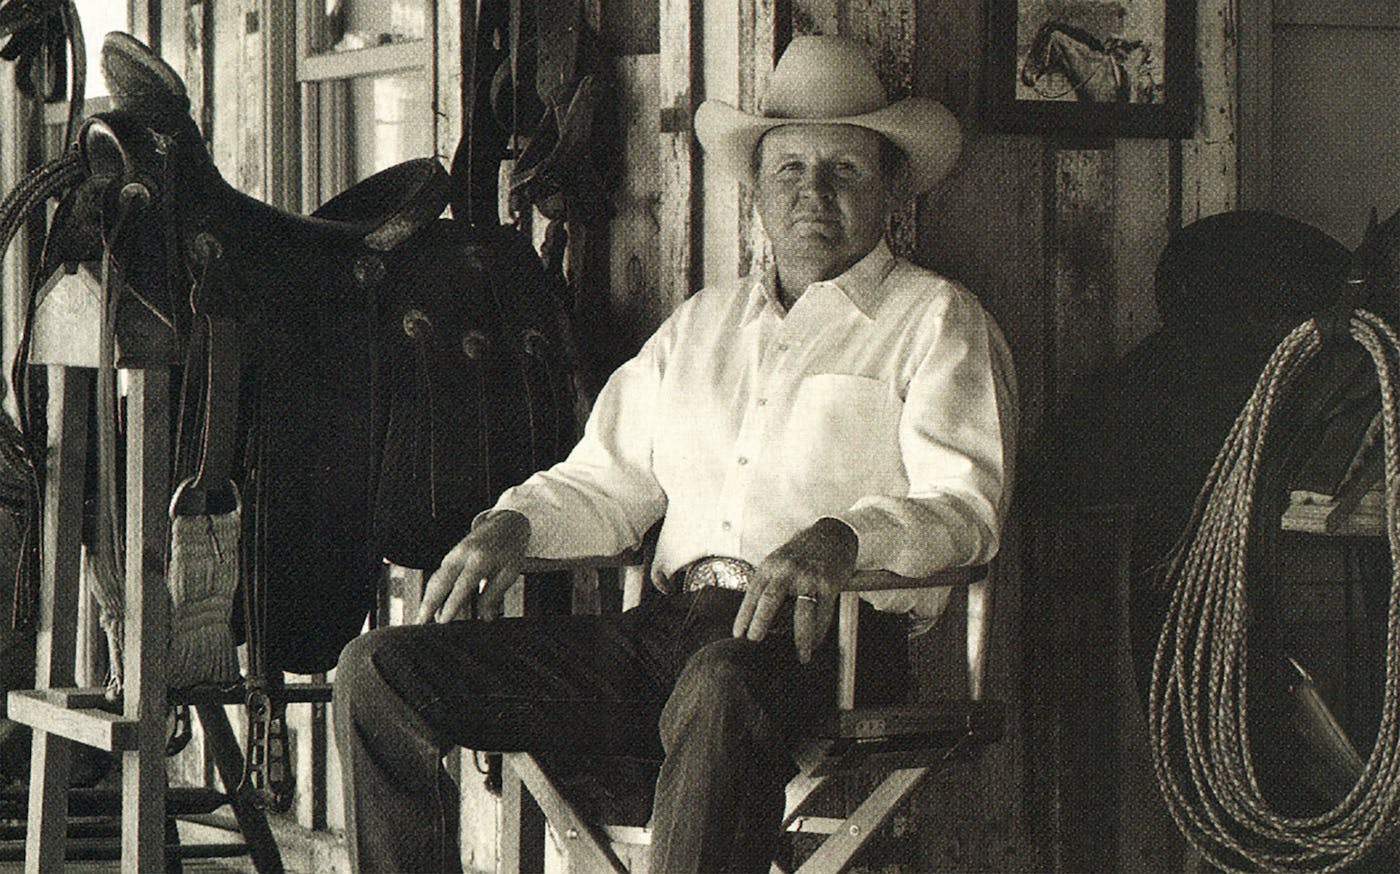 Buster Welch - Cowboys and Indians Magazine